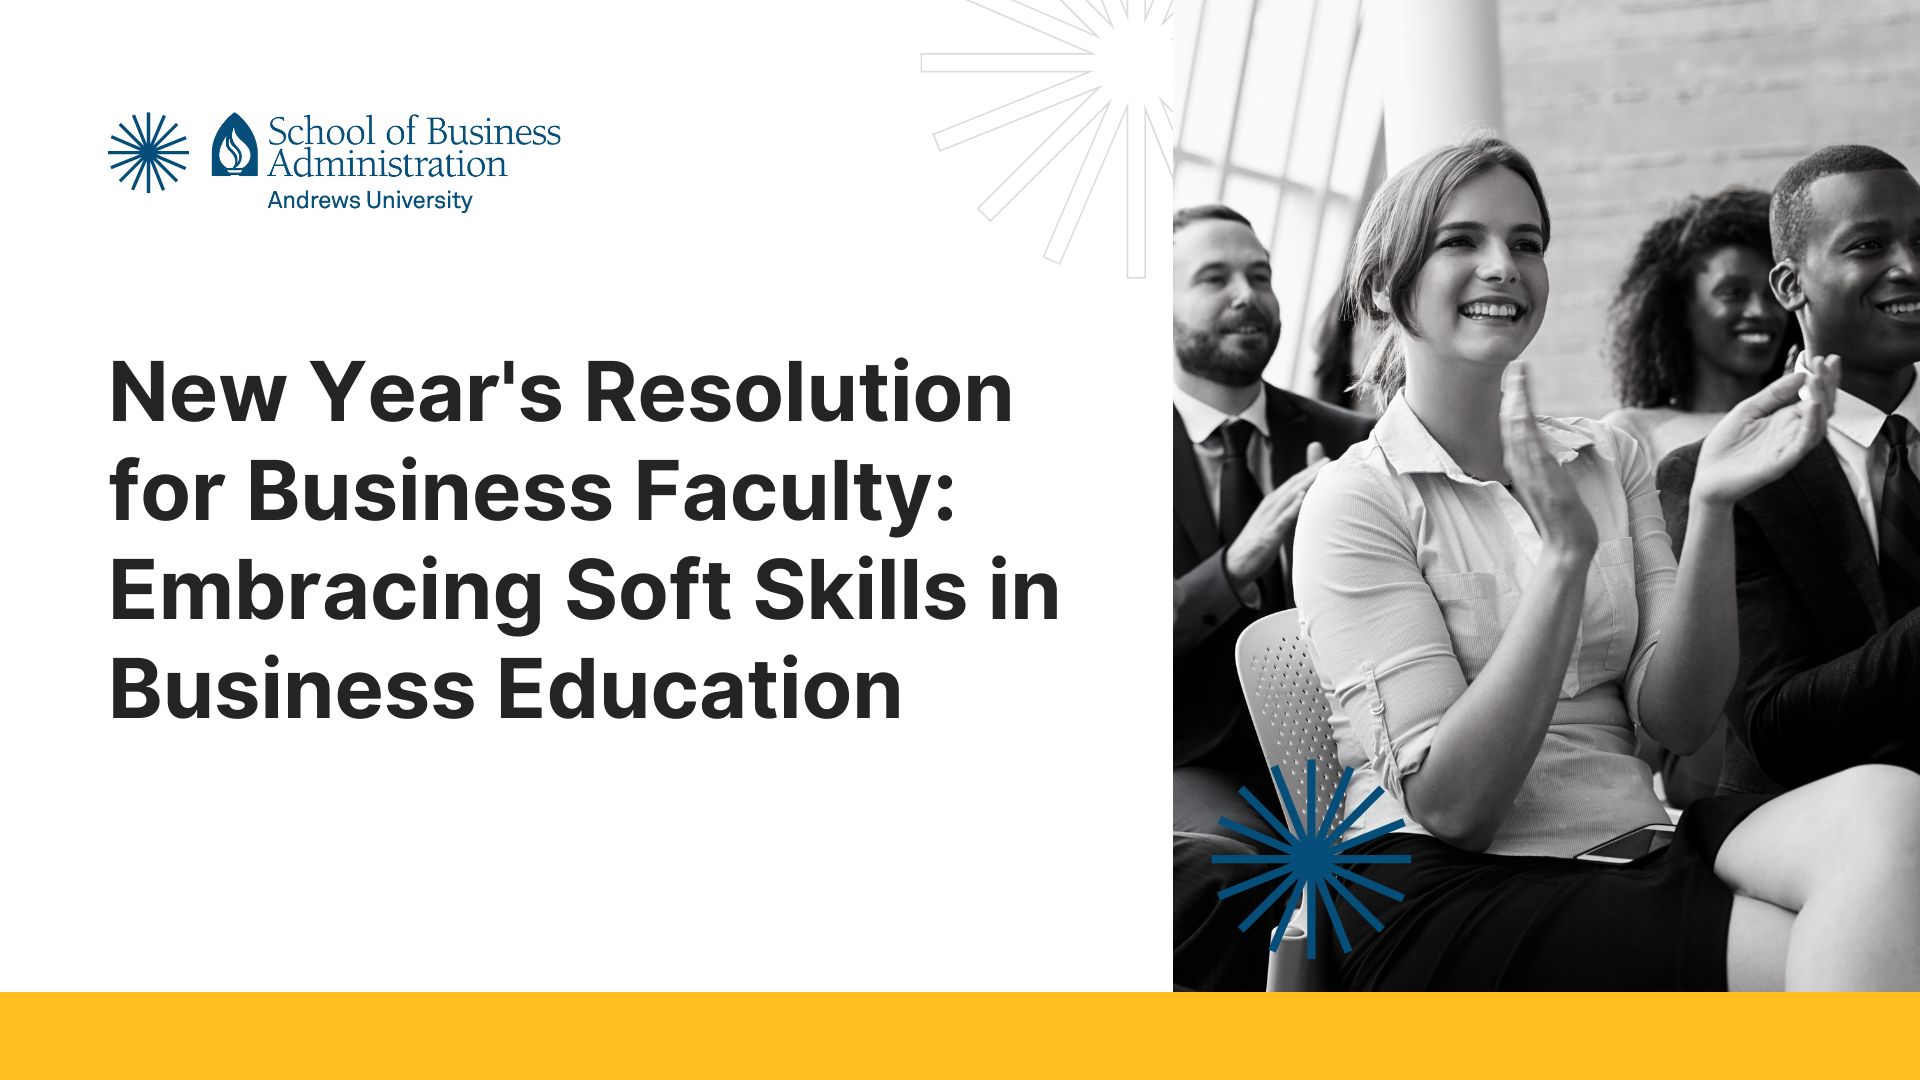 New Year’s Resolution for Business Faculty: Embracing Soft Skills in Business Education